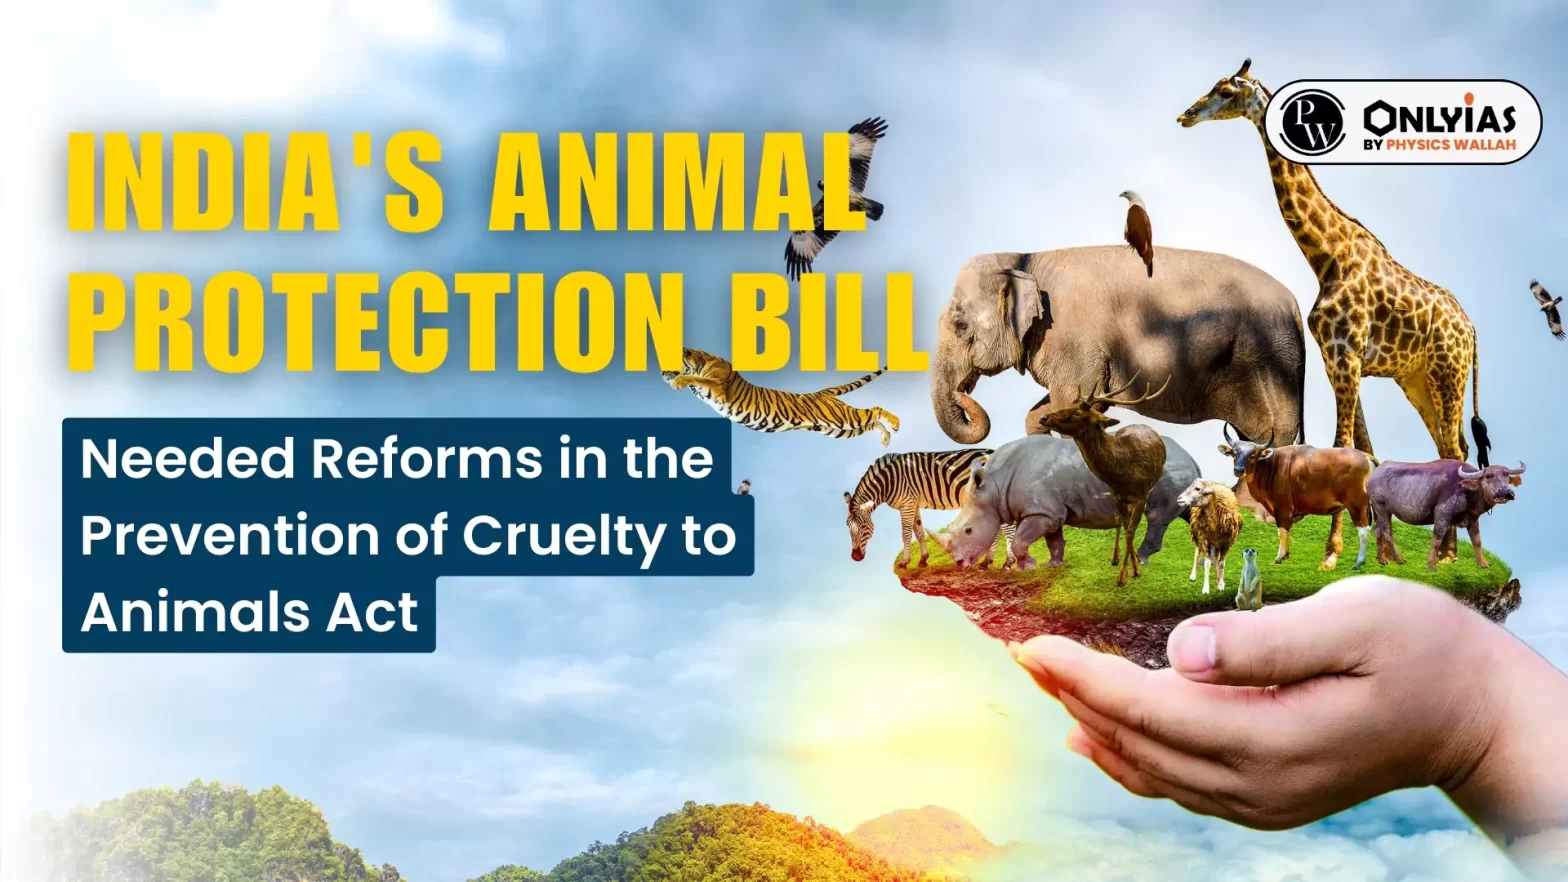 India’s Animal Protection Bill: Needed Reforms in the Prevention of Cruelty to Animals Act